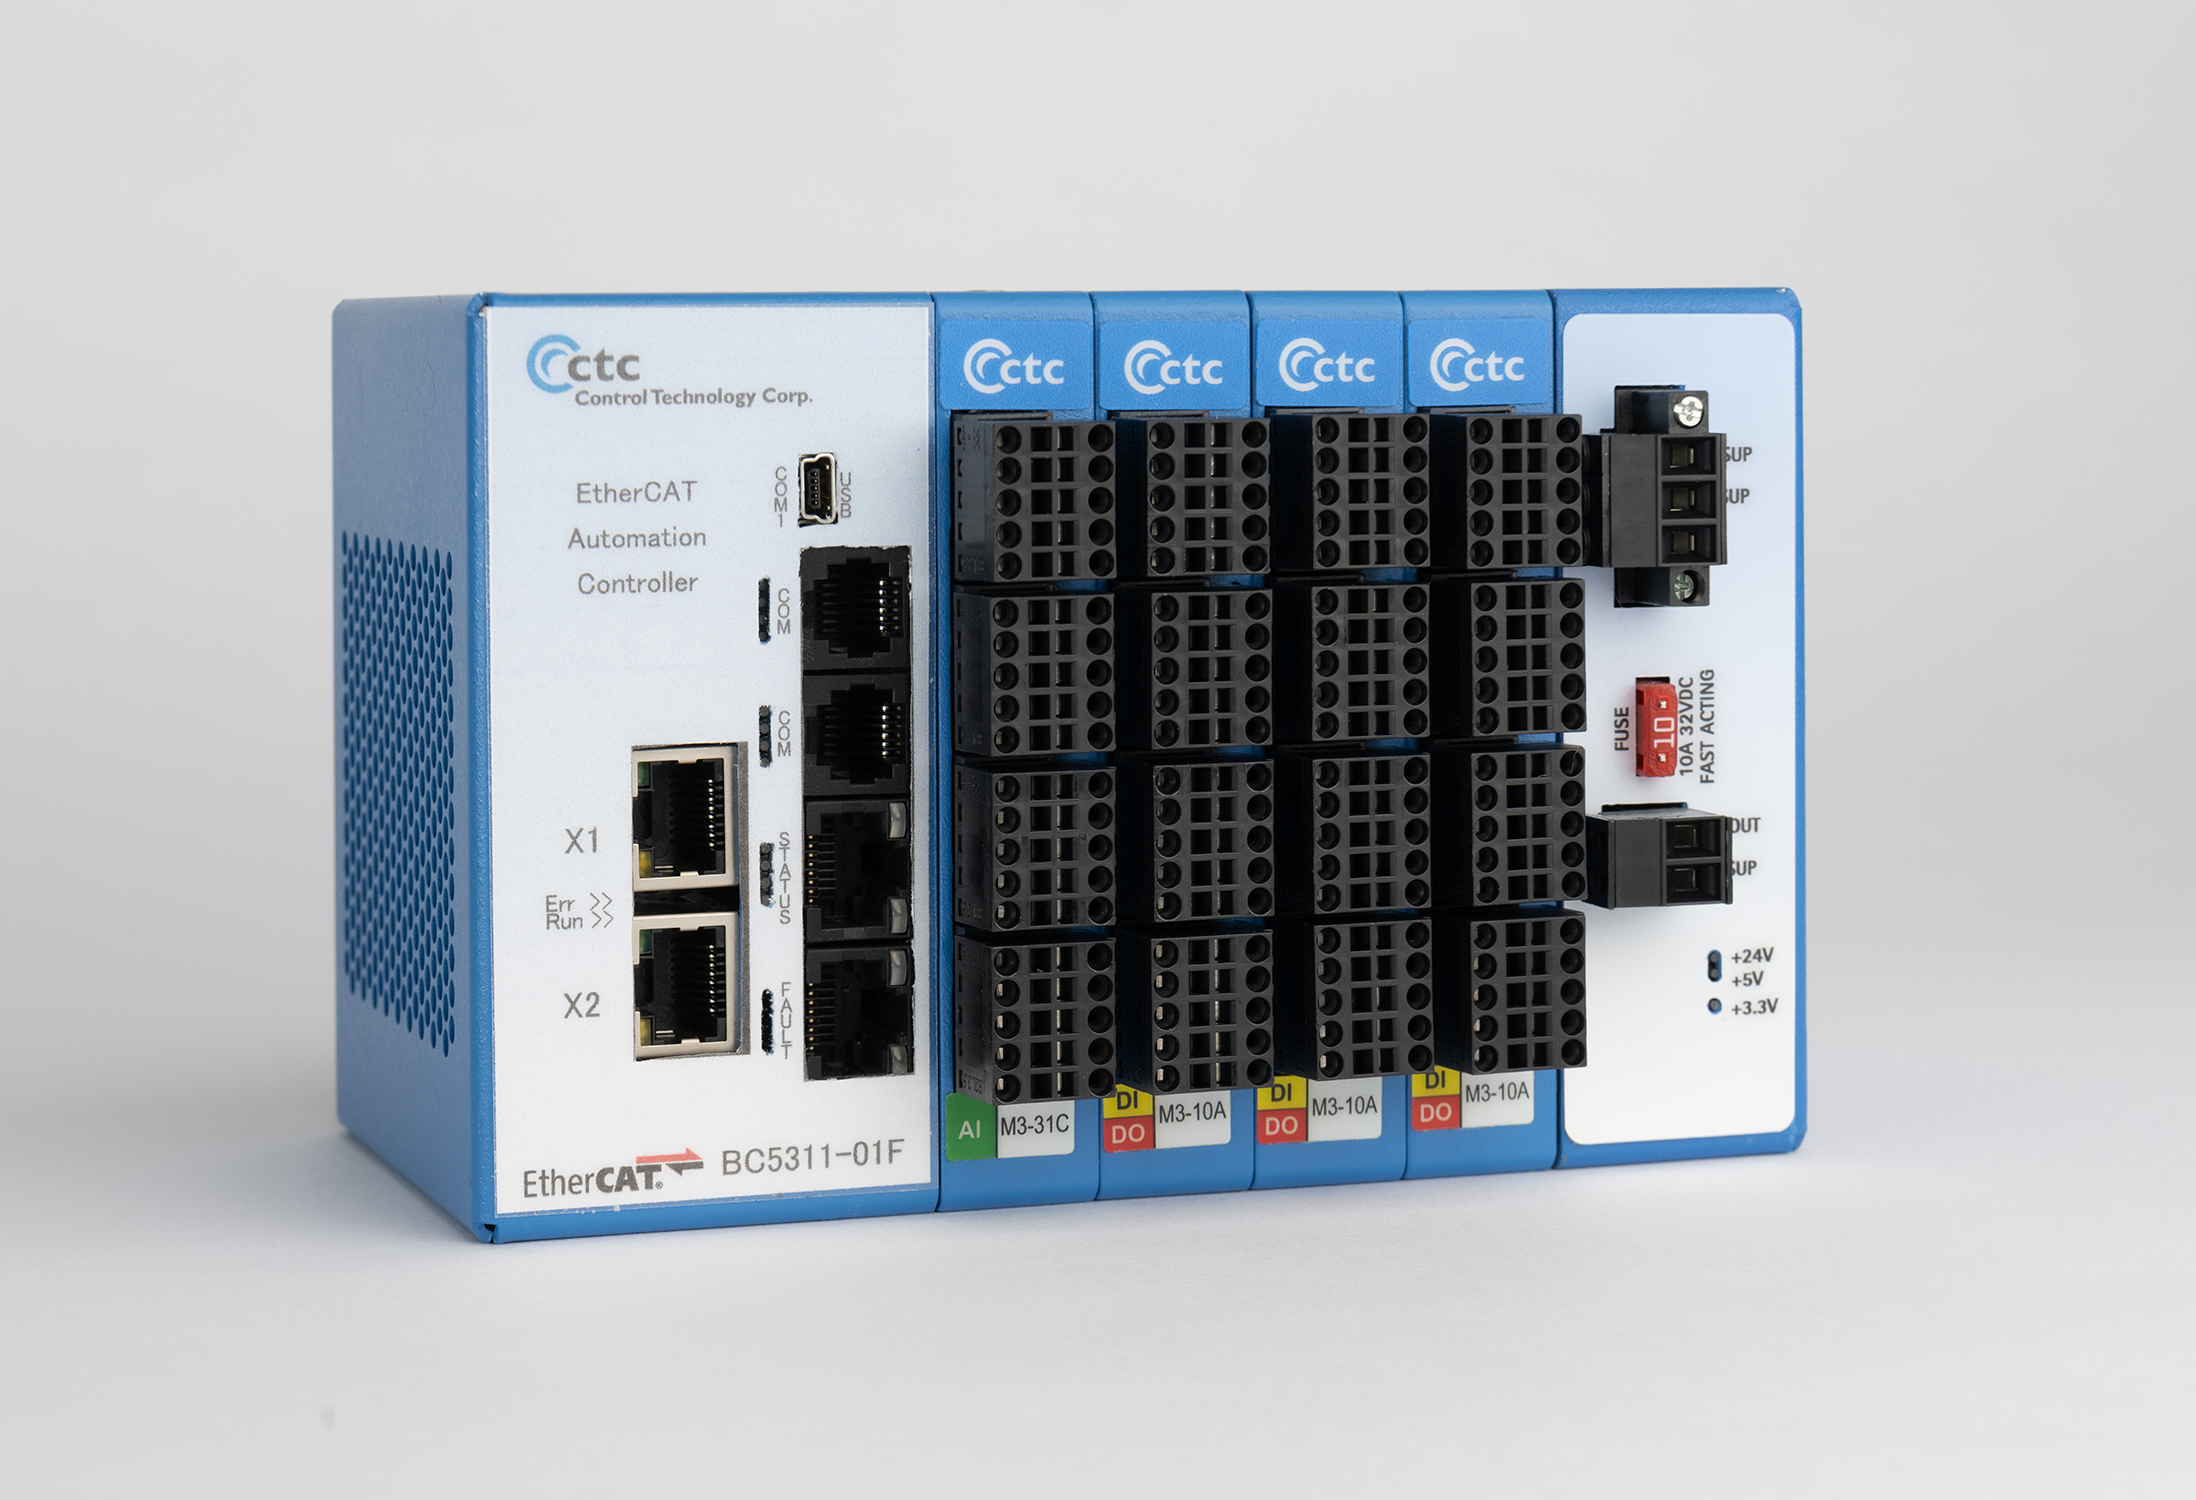 ECAT EtherCAT Coupler and Automation Controller with 4 slots.